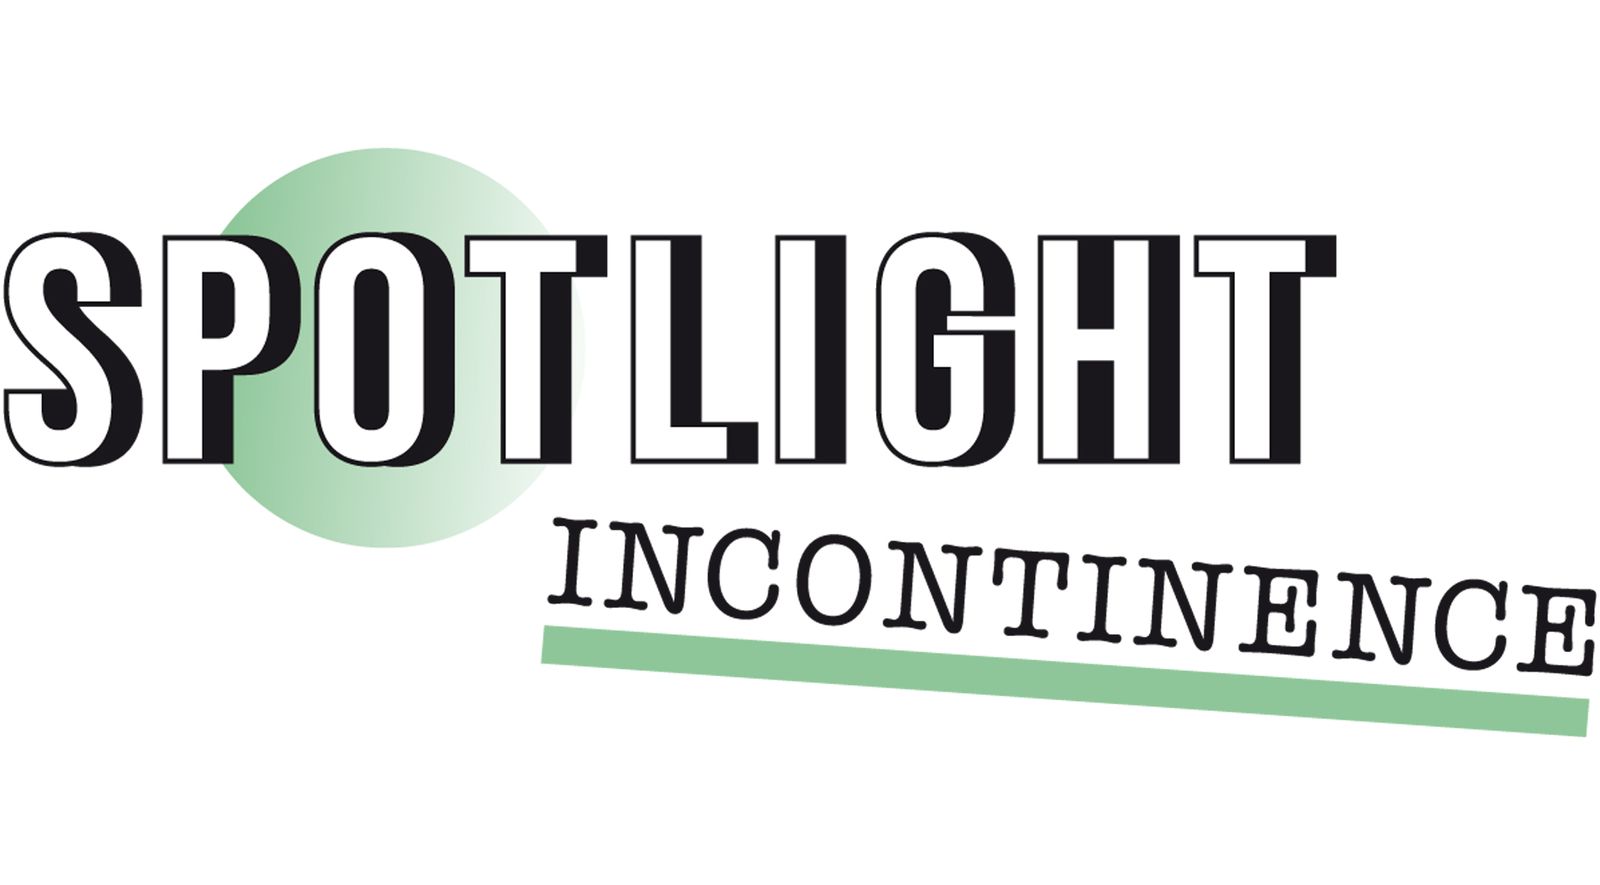 „Spotlight incontinence“ – Infections urinaires